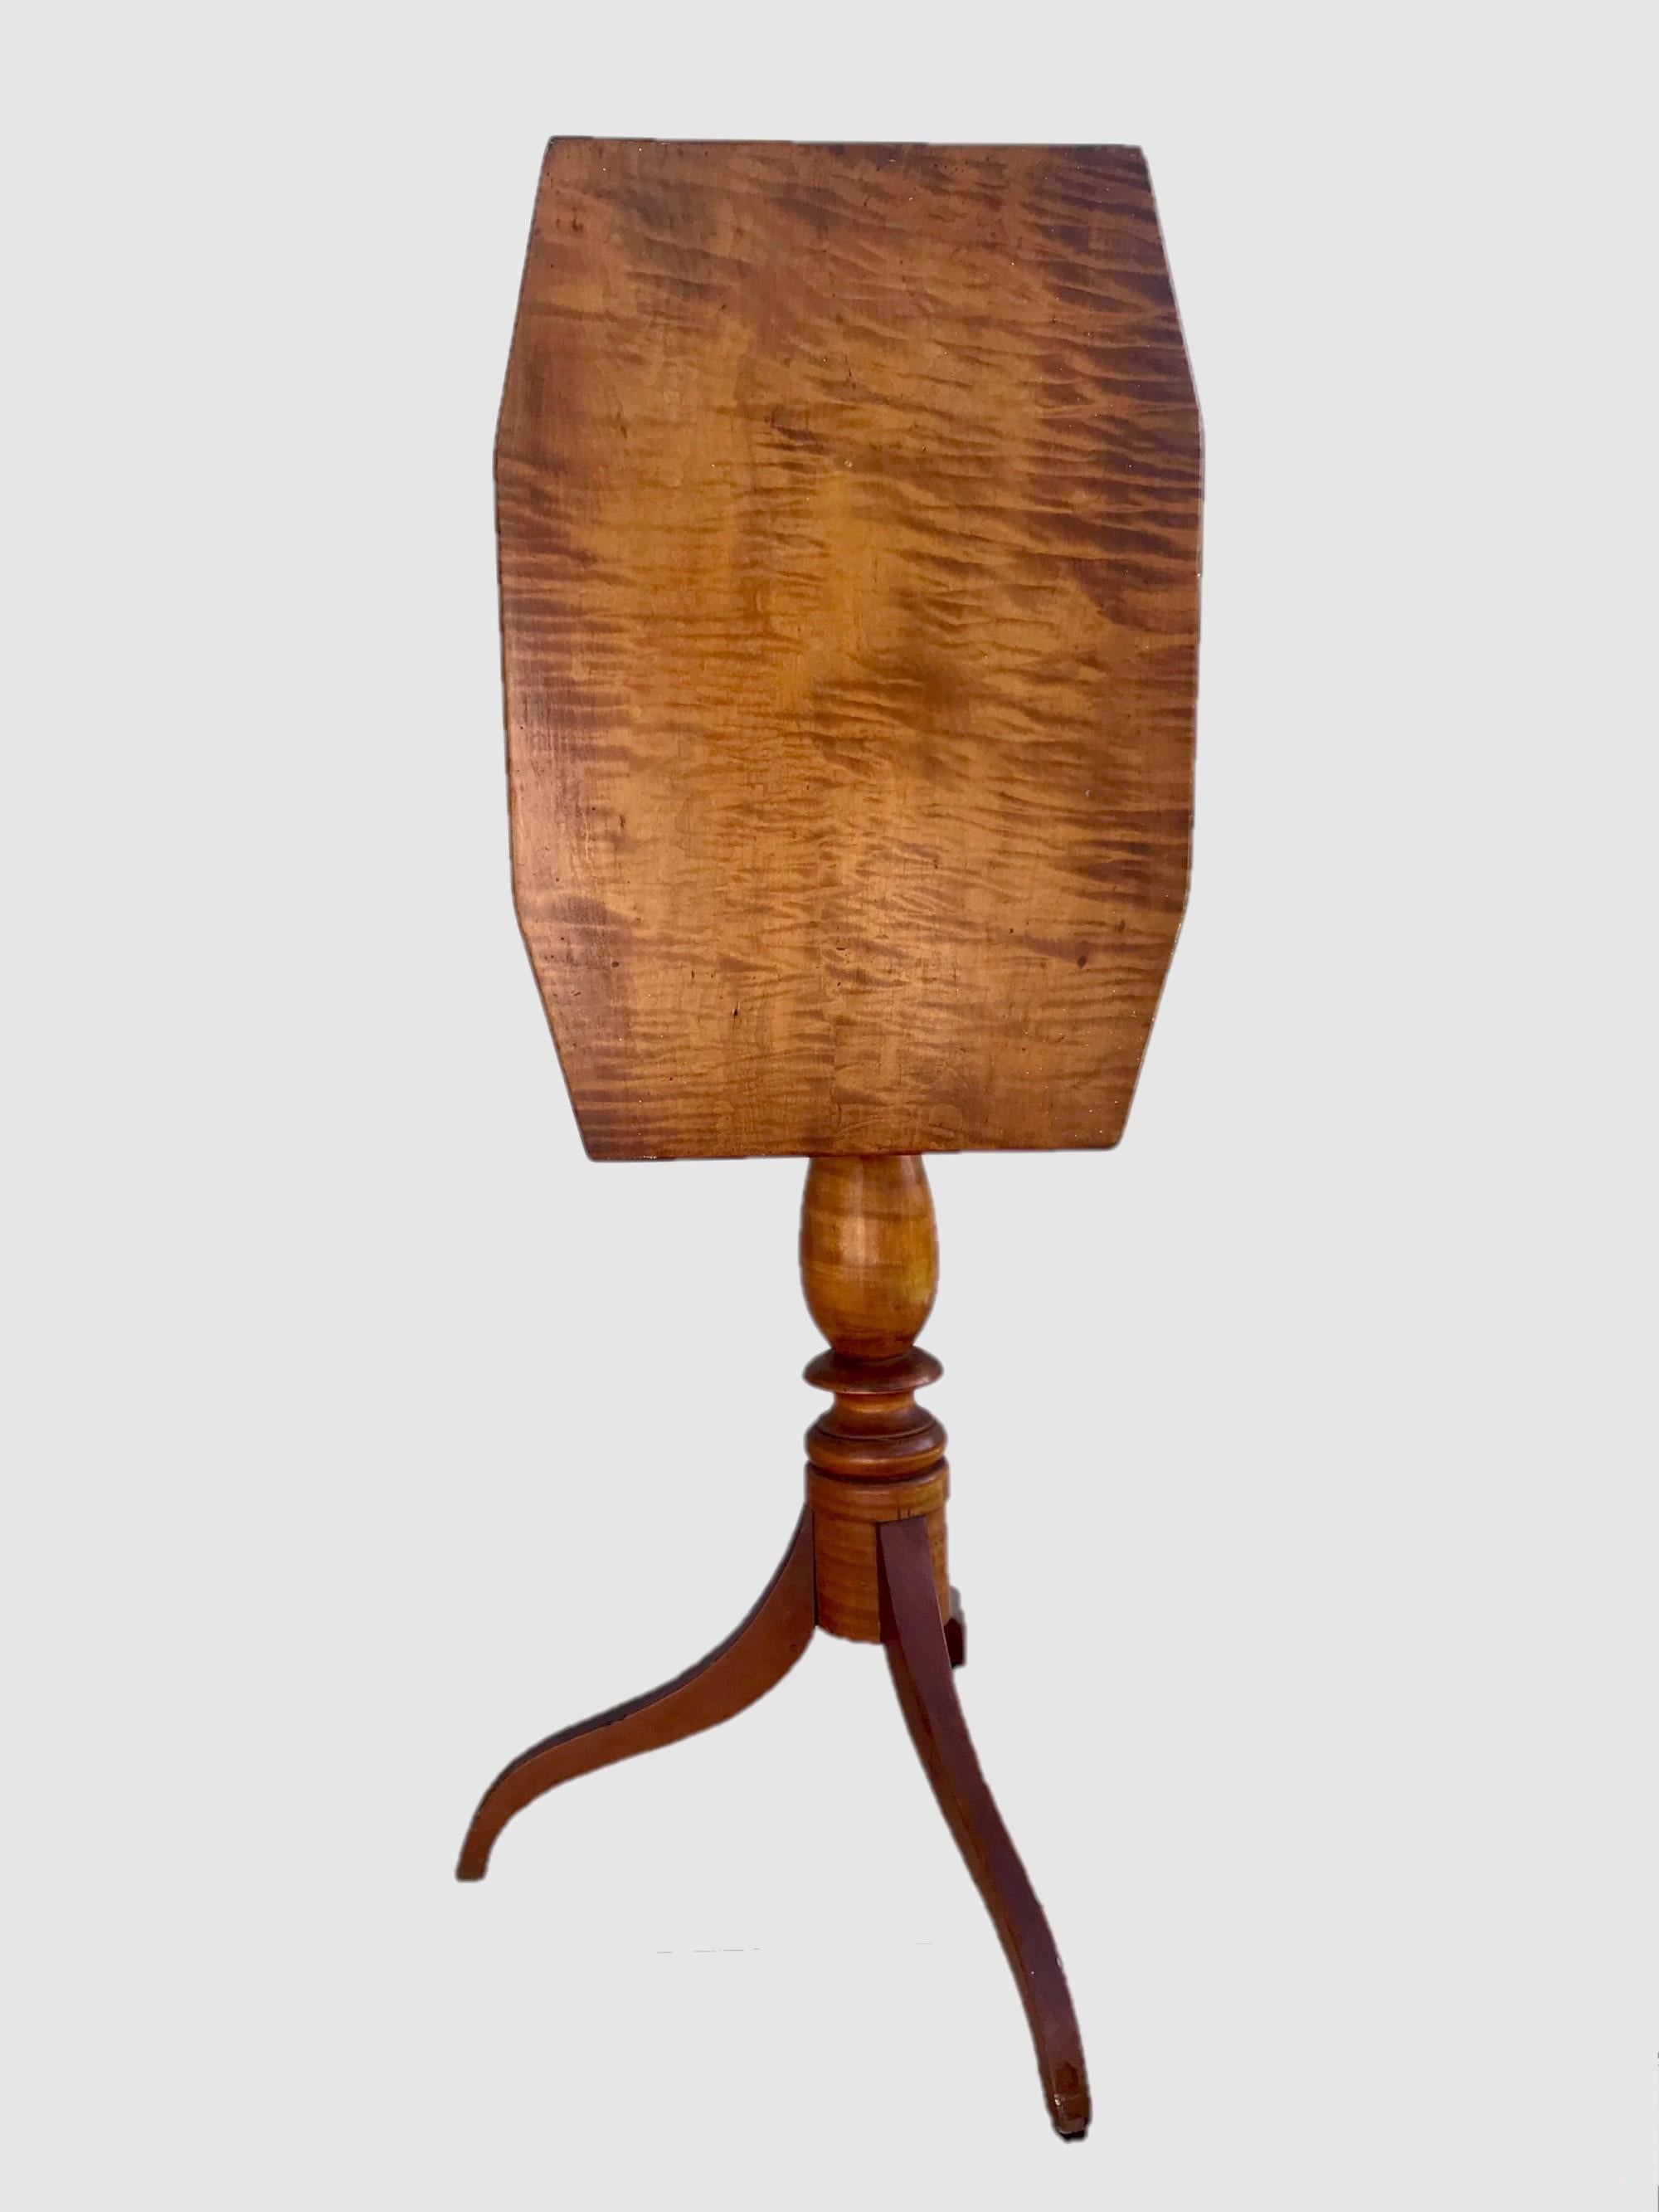 New England Federal tilt-top tripod table tiger maple, circa 1810

Beautiful American tripod tilt-top candle stand table. It was created during the Federal era circa 1810 in New England and constructed with tiger maple wood. This well balanced and